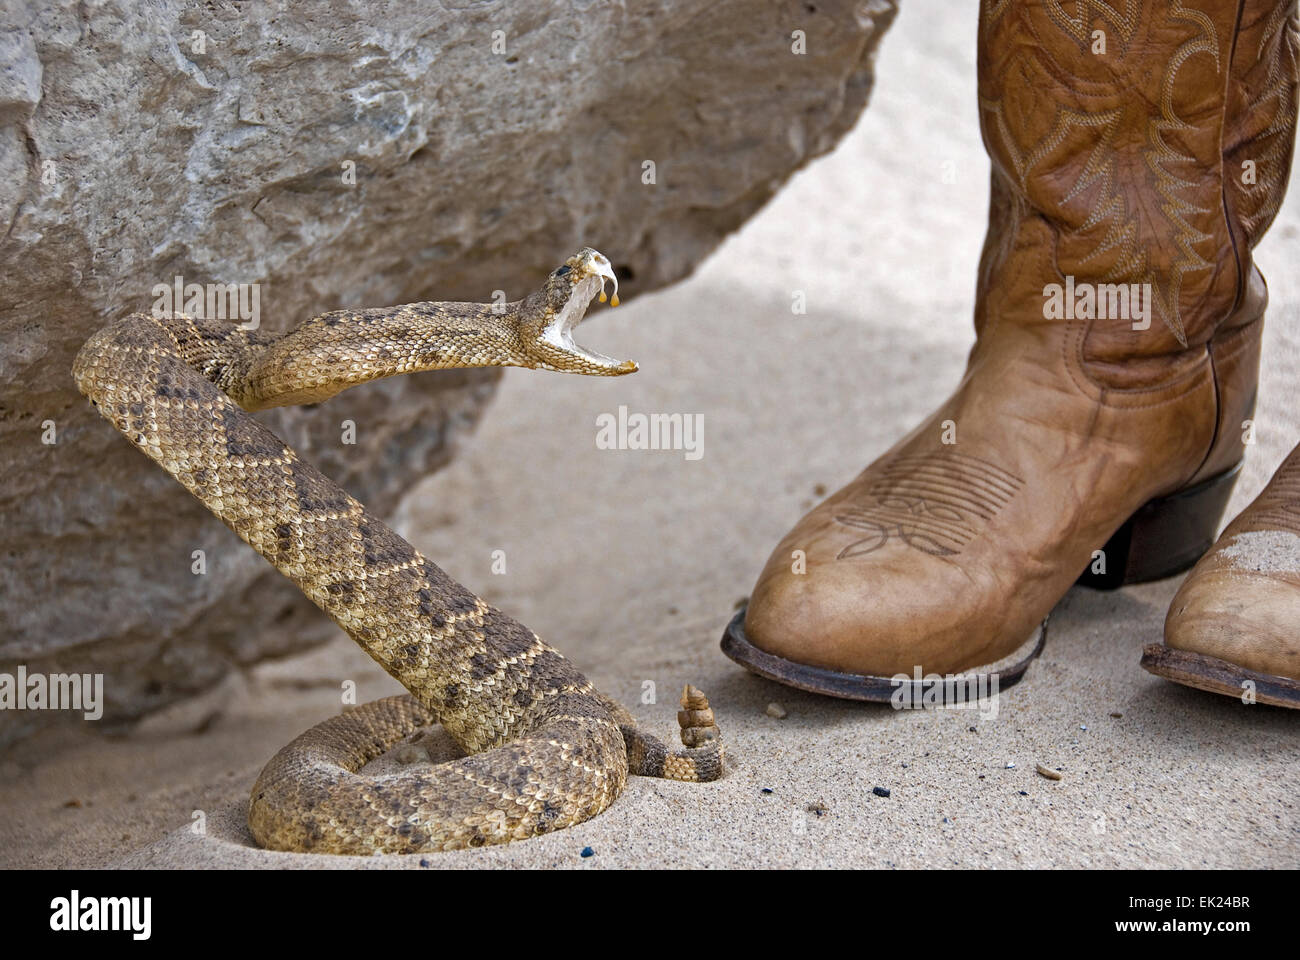 Pair of western style leather boots by rattle snake ready to attack. Stock Photo